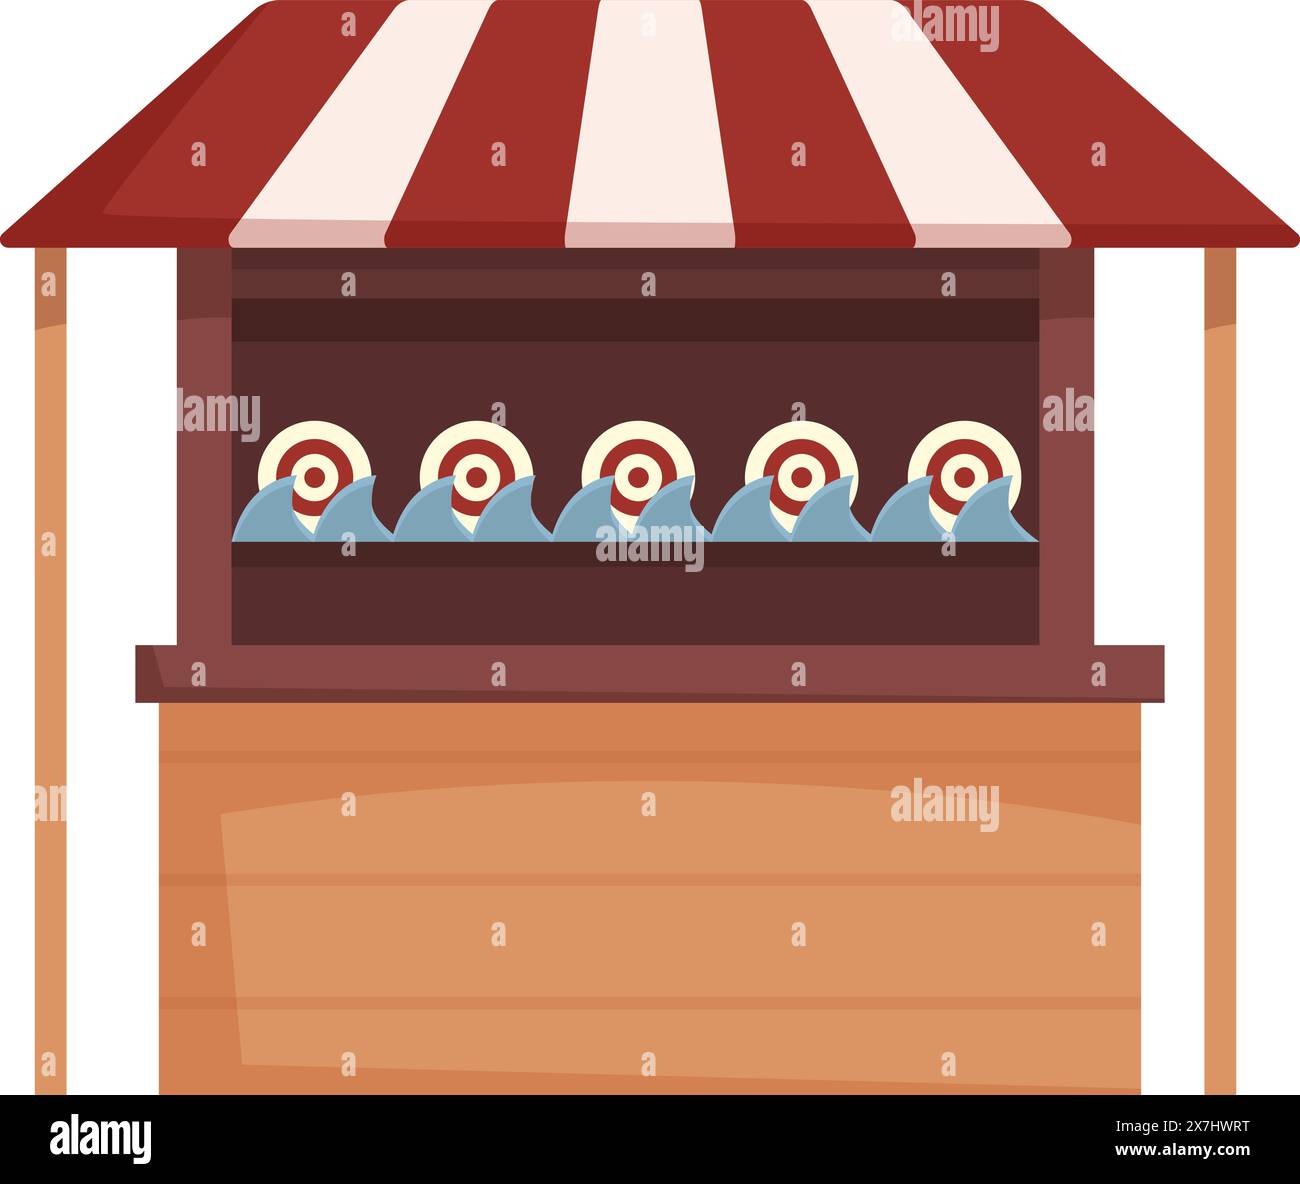 Vector illustration of a colorful carnival shooting game booth with duck targets Stock Vector